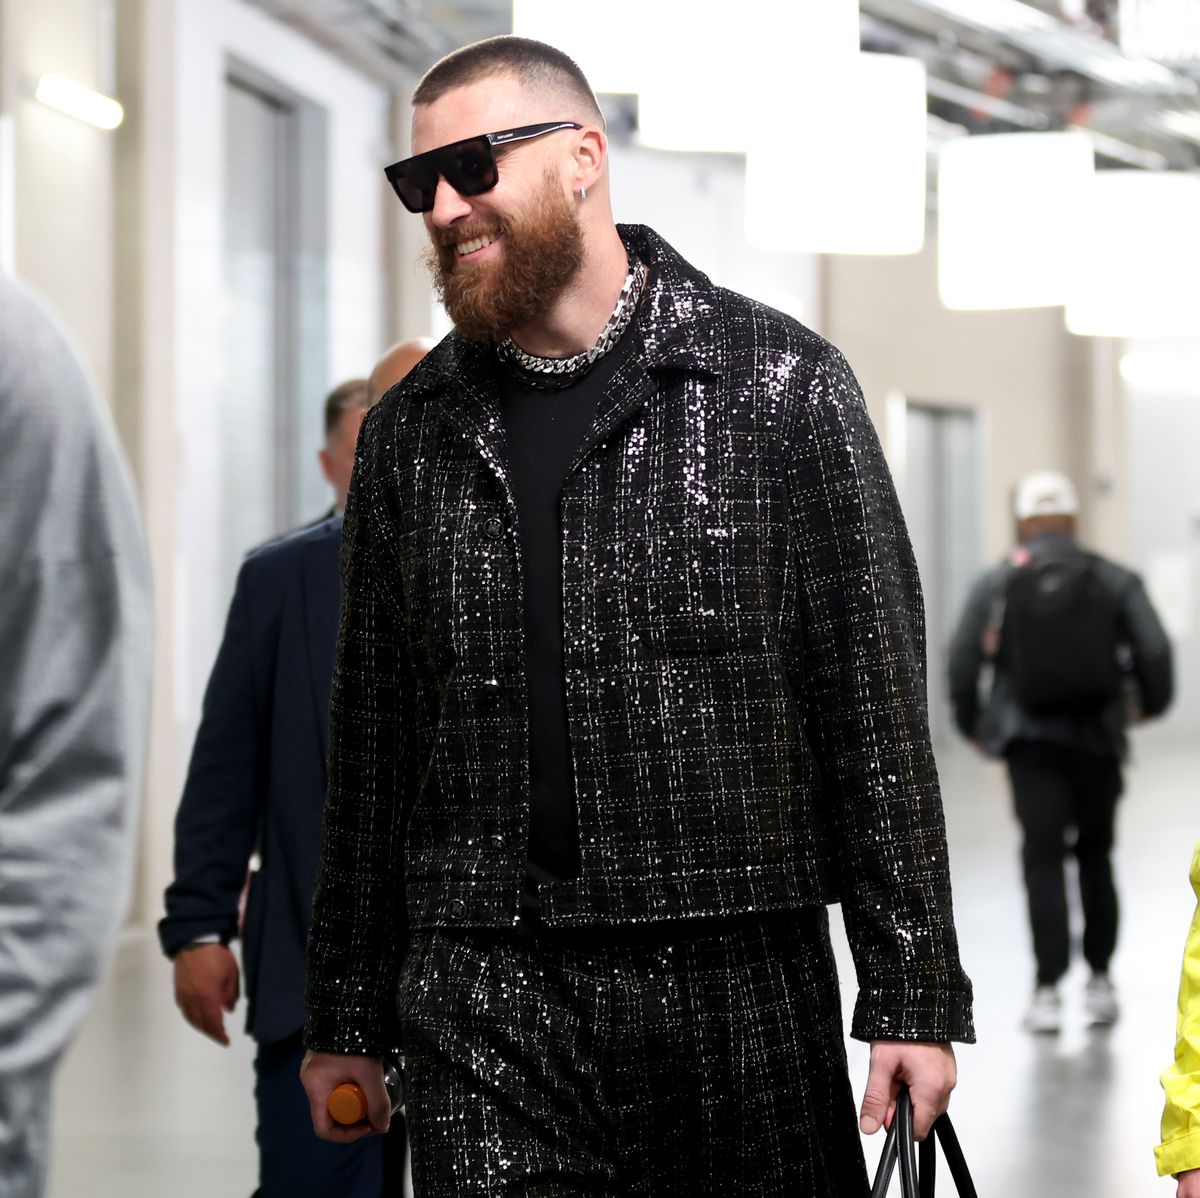 las vegas, nevada february 11 travis kelce 87 of the kansas city chiefs walks through the tunnel as he leaves the stadium after defeating the san francisco 49ers 25 22 in overtime during super bowl lviii at allegiant stadium on february 11, 2024 in las vegas, nevada photo by steph chambersgetty images